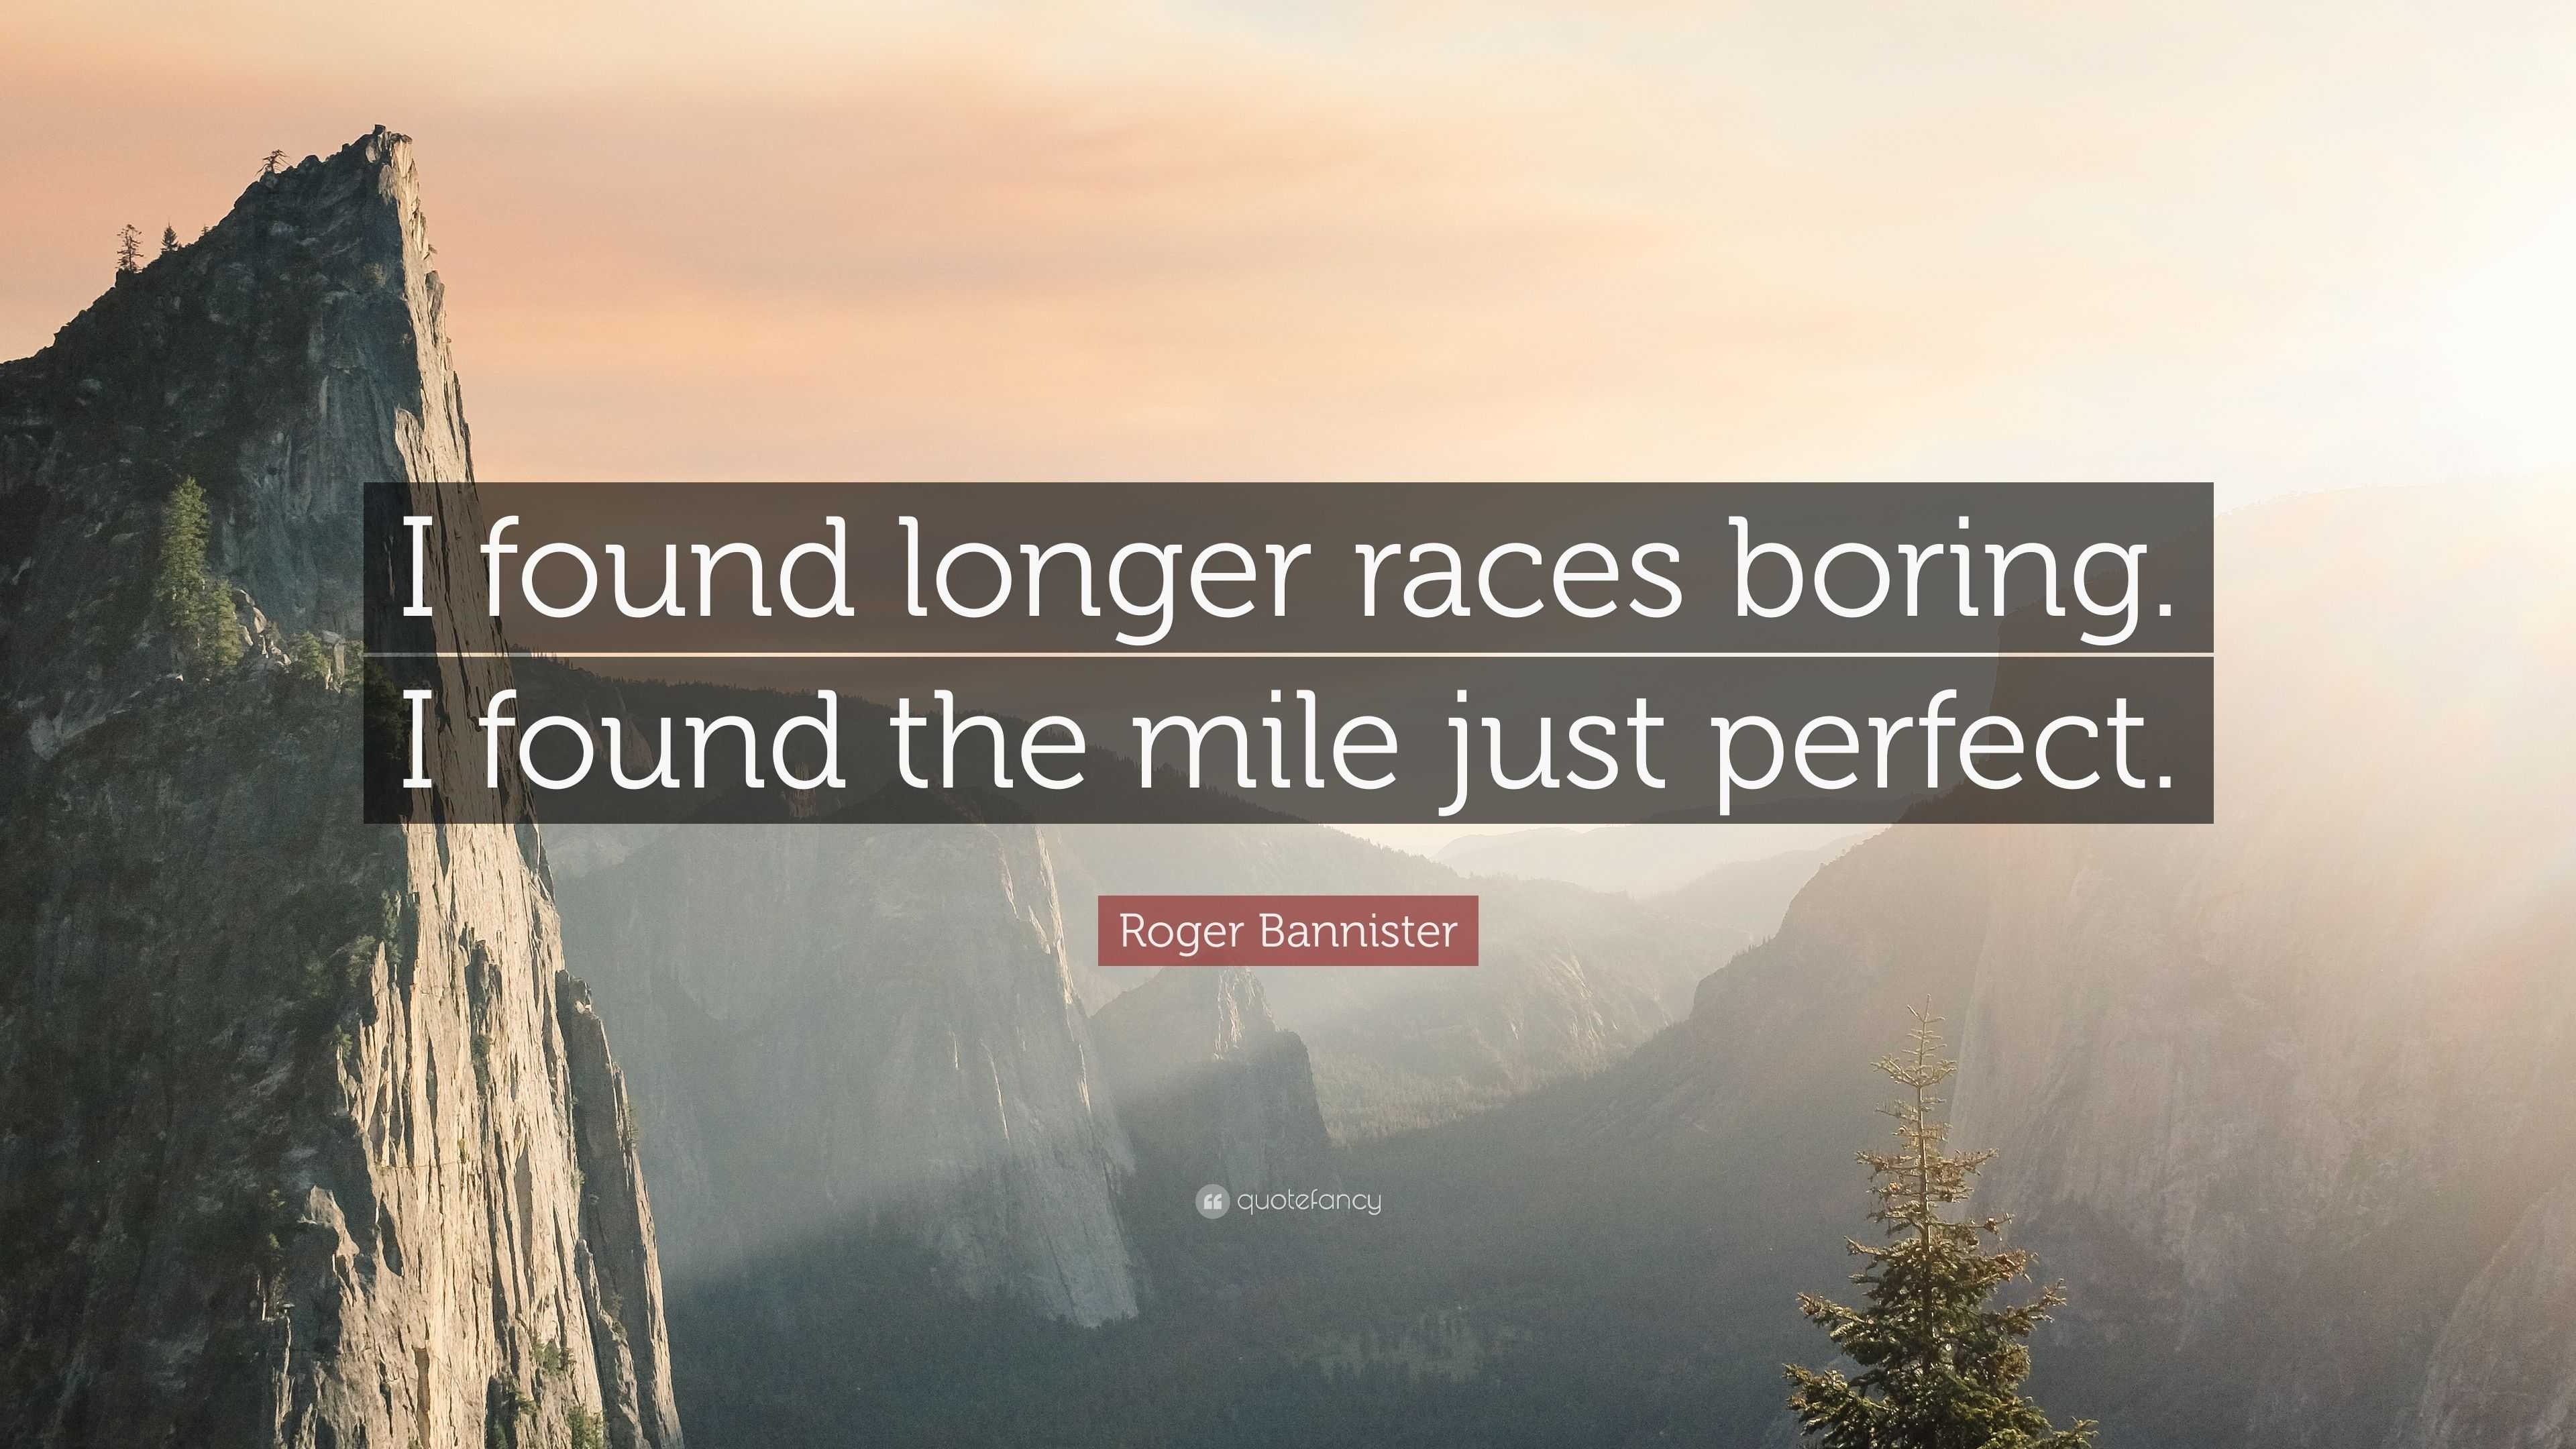 Roger Bannister Quote: “I found longer races boring. I found the mile